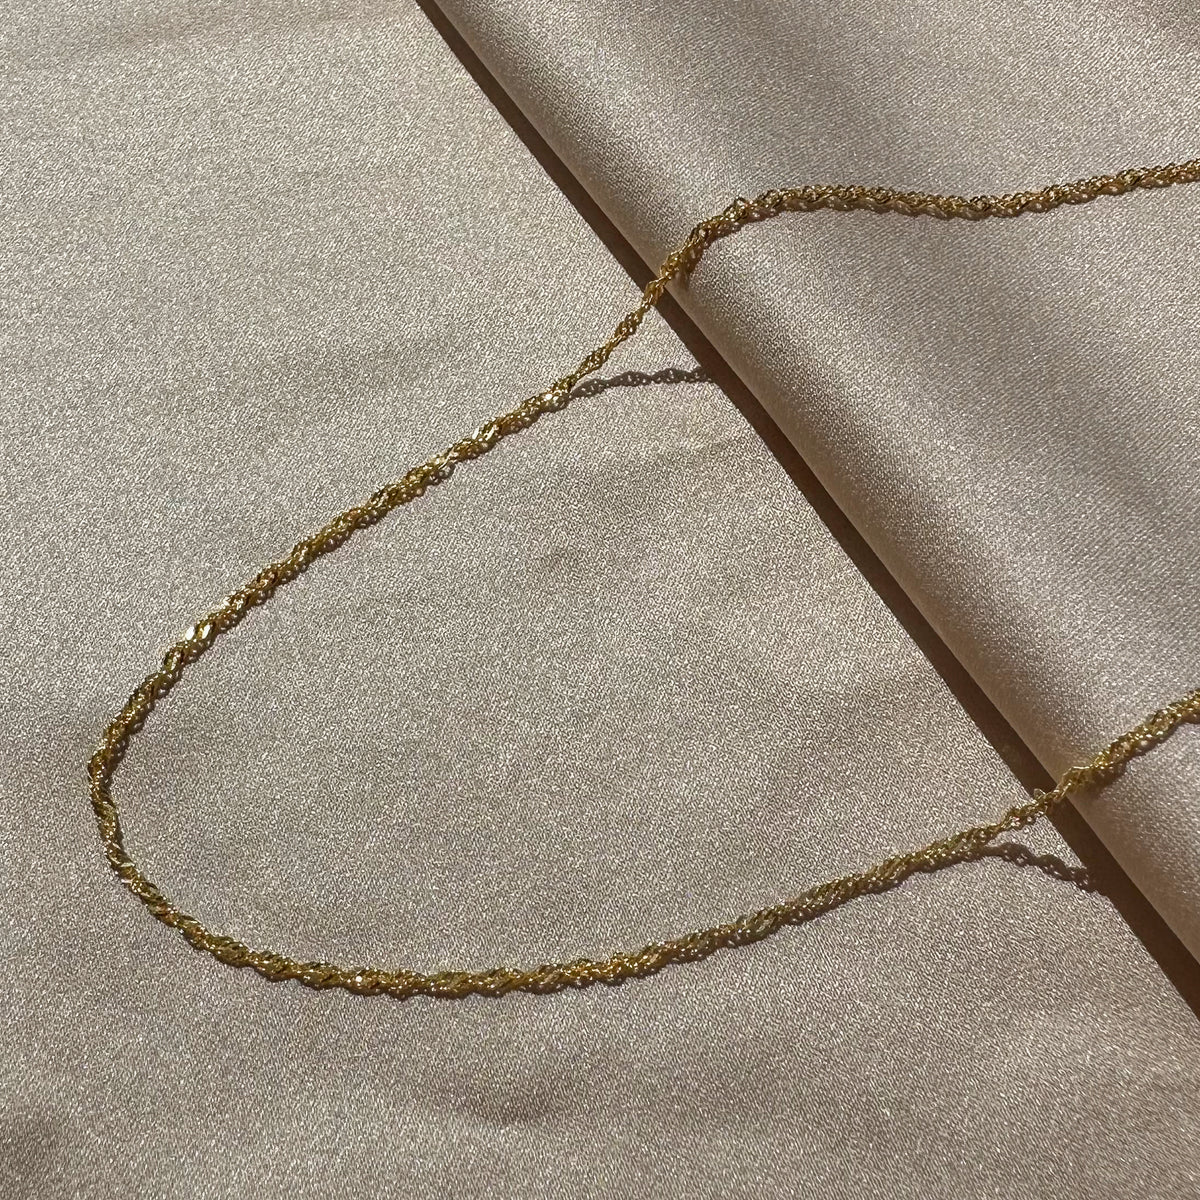 Buy 18 Carat Gold Vermeil Twist Chain, Twist Chain Necklace, Decorative Twist  Chain Pendant Necklace in 16, 18, 24 or 30 Inch Chain Online in India - Etsy